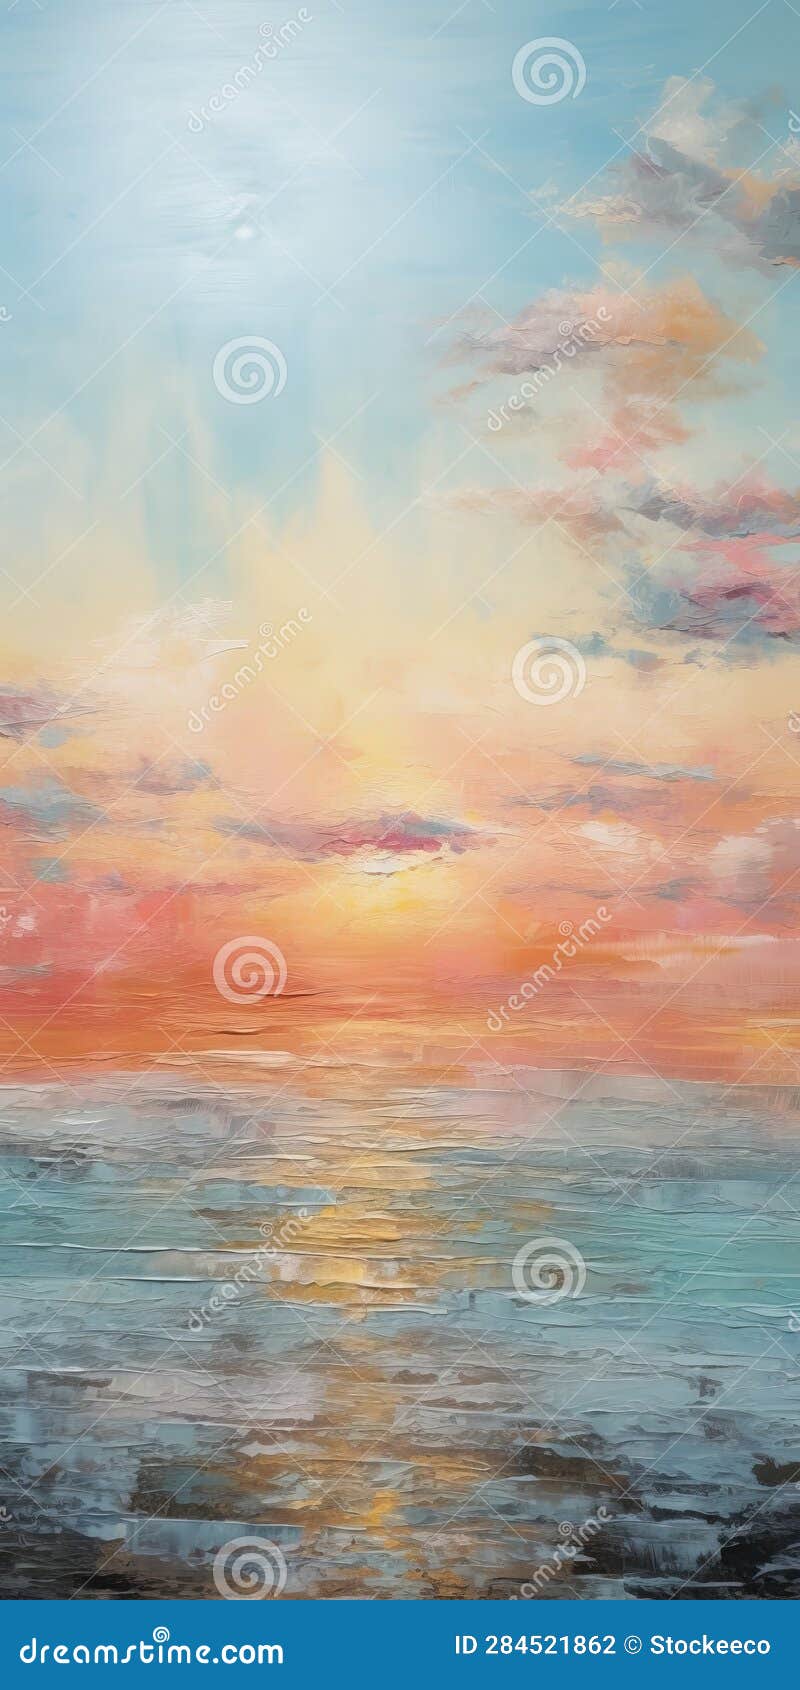 serenity of an ocean sunset: dreamy impressionist landscape painting